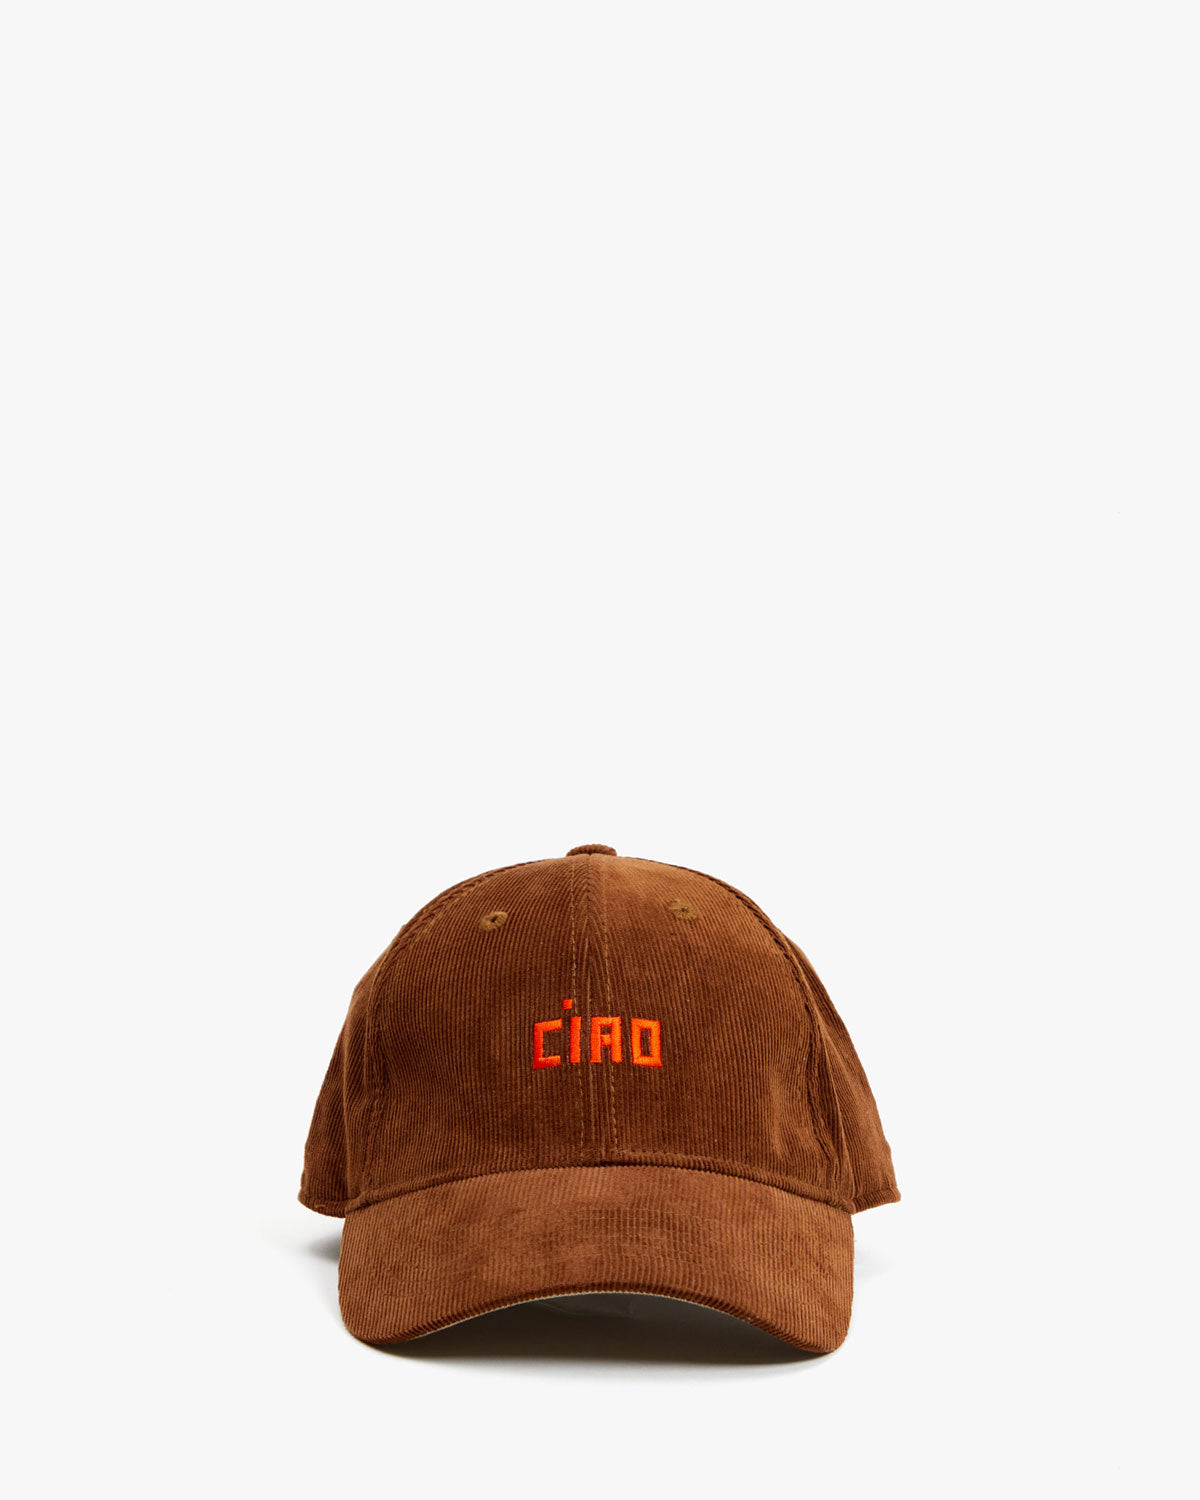 front image of the Brown Corduroy Ciao Baseball Hat